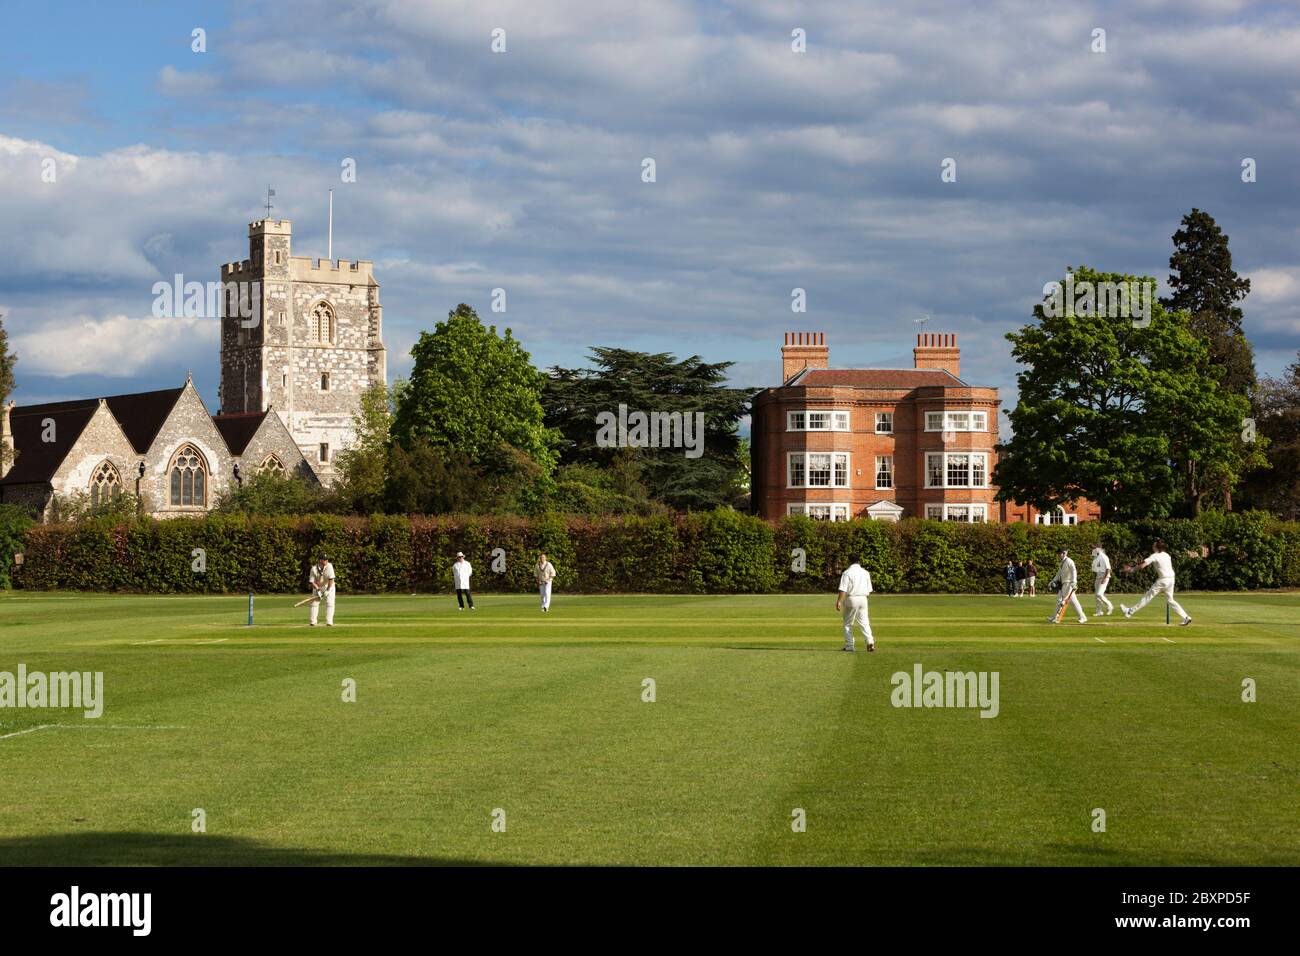 Game of cricket in front of St Michael's Church, Bray-on-Thames, Berkshire, England, United Kingdom Stock Photo